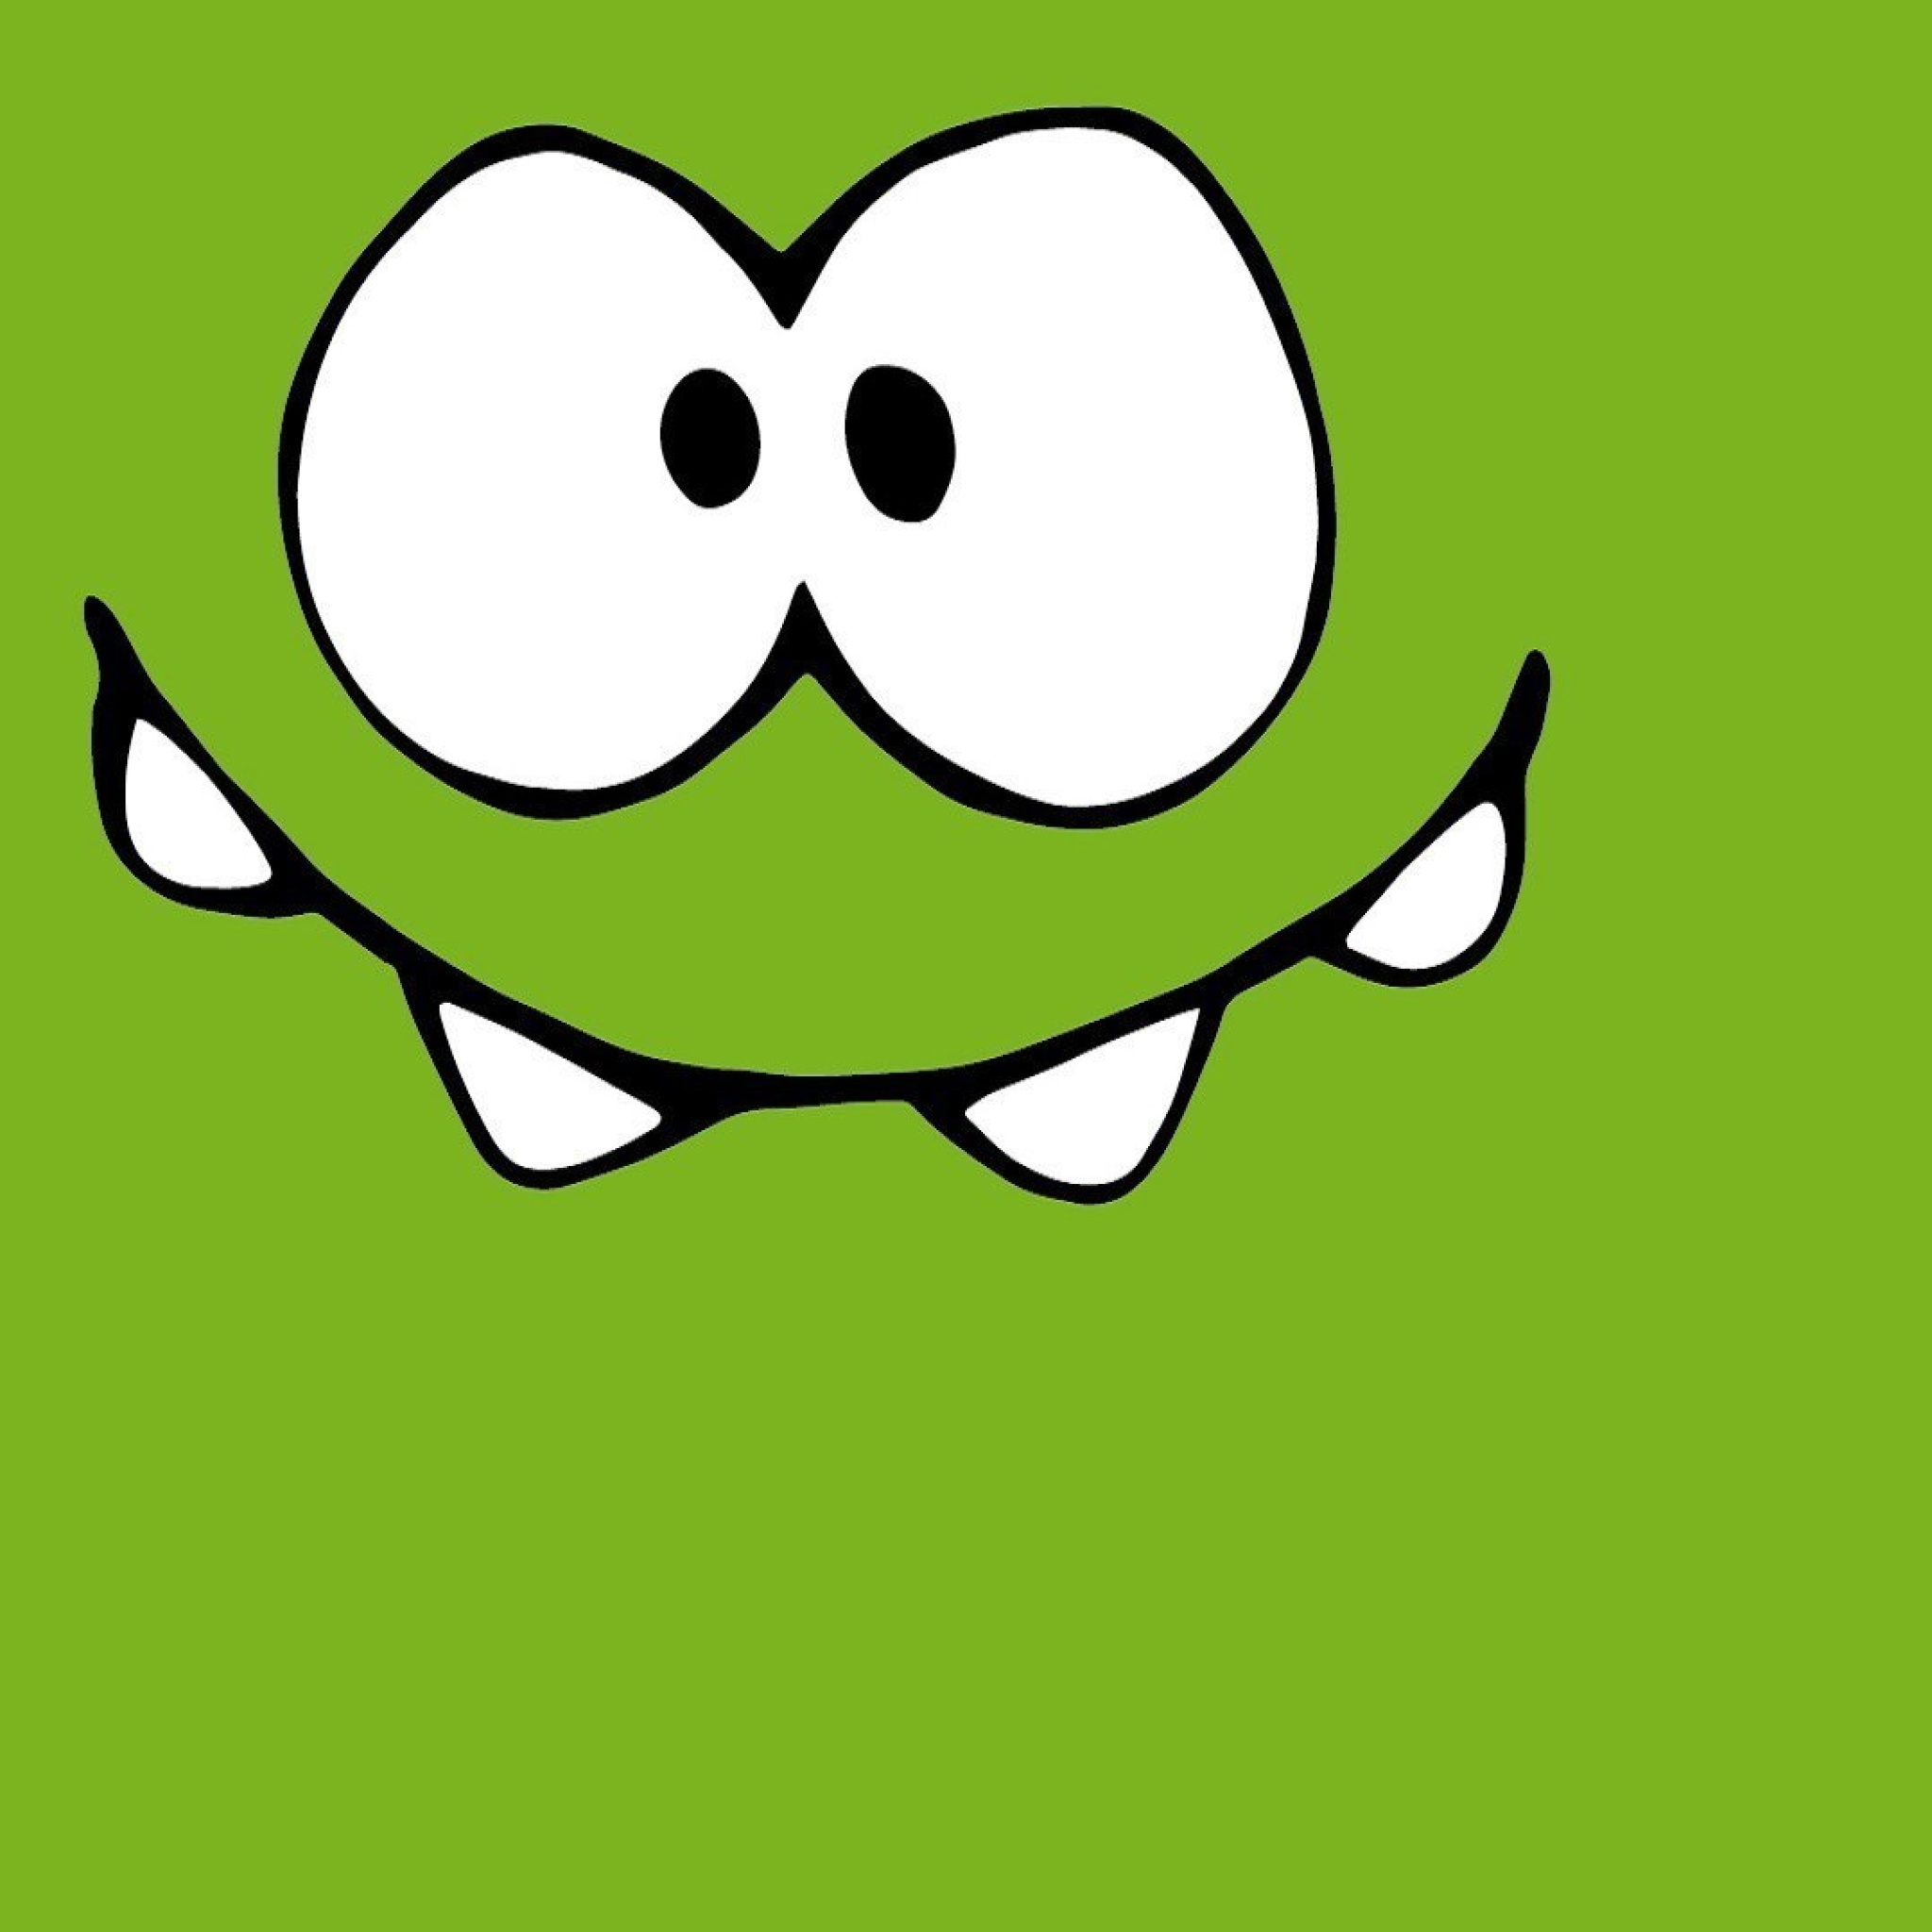 Om Nom from game Cut the Rope wallpaper 2048x2048